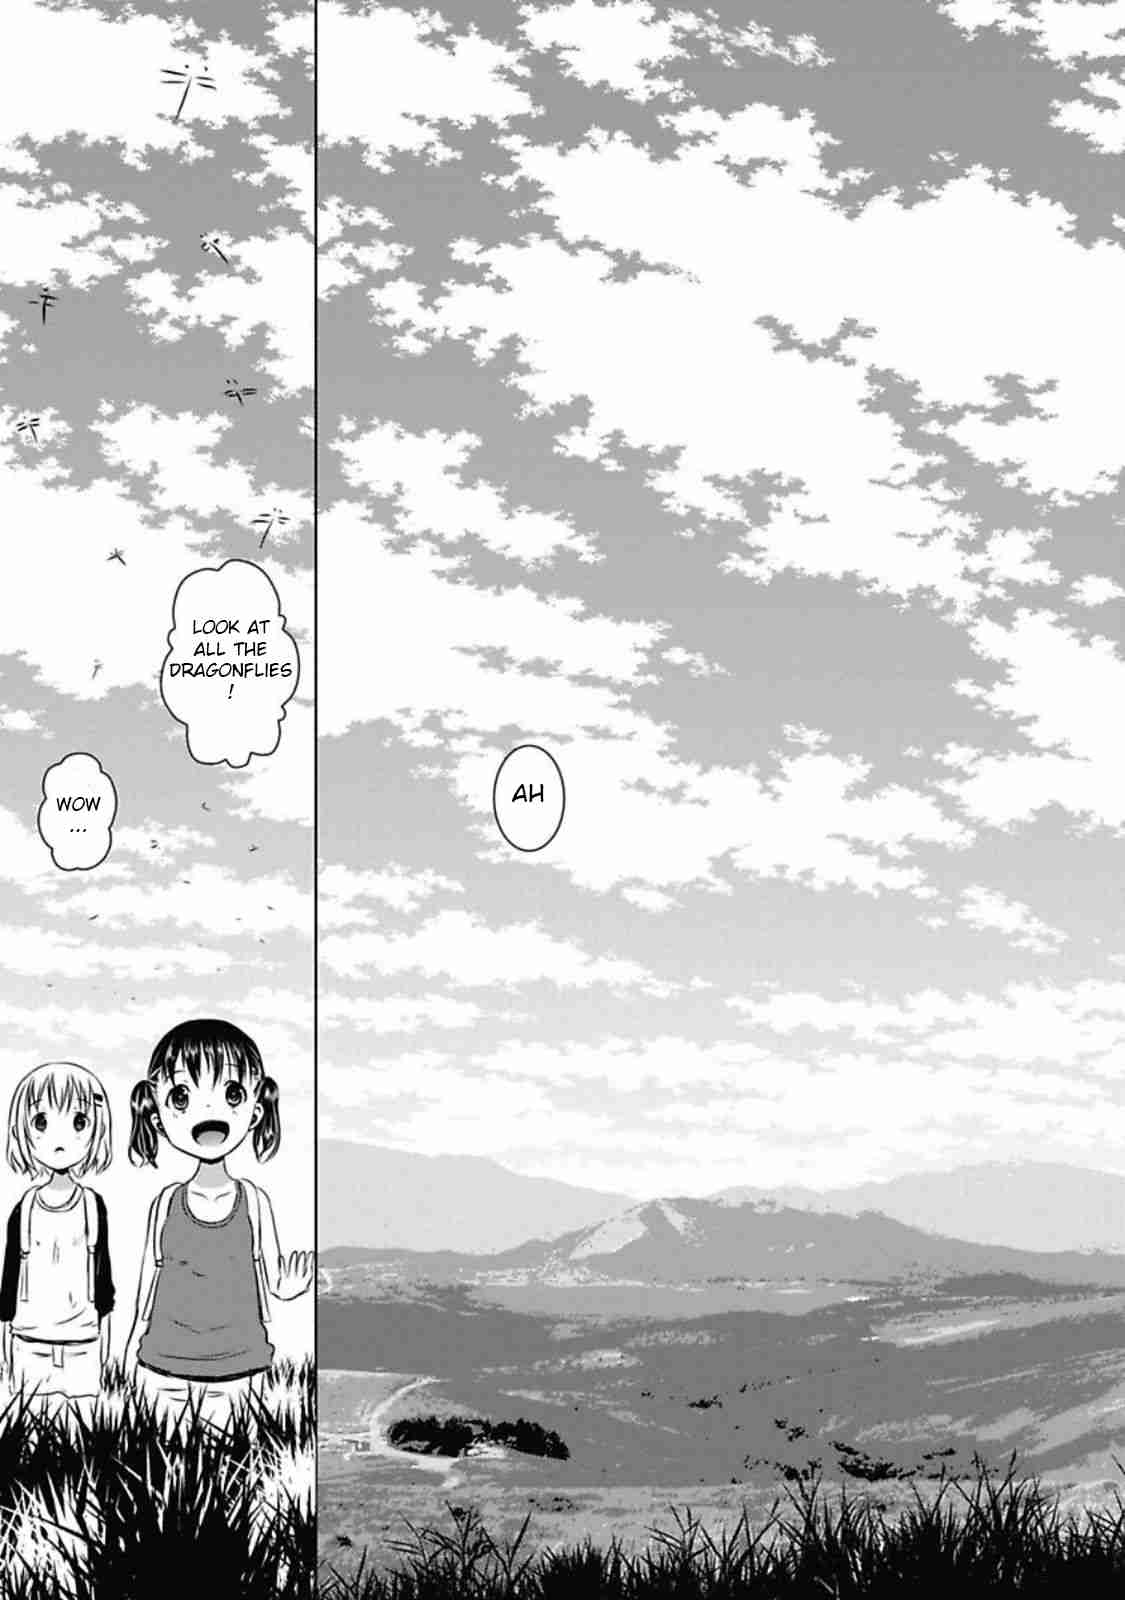 Yama No Susume Vol. 4 Ch. 25 Where Is The Mountain Of Our Memories?